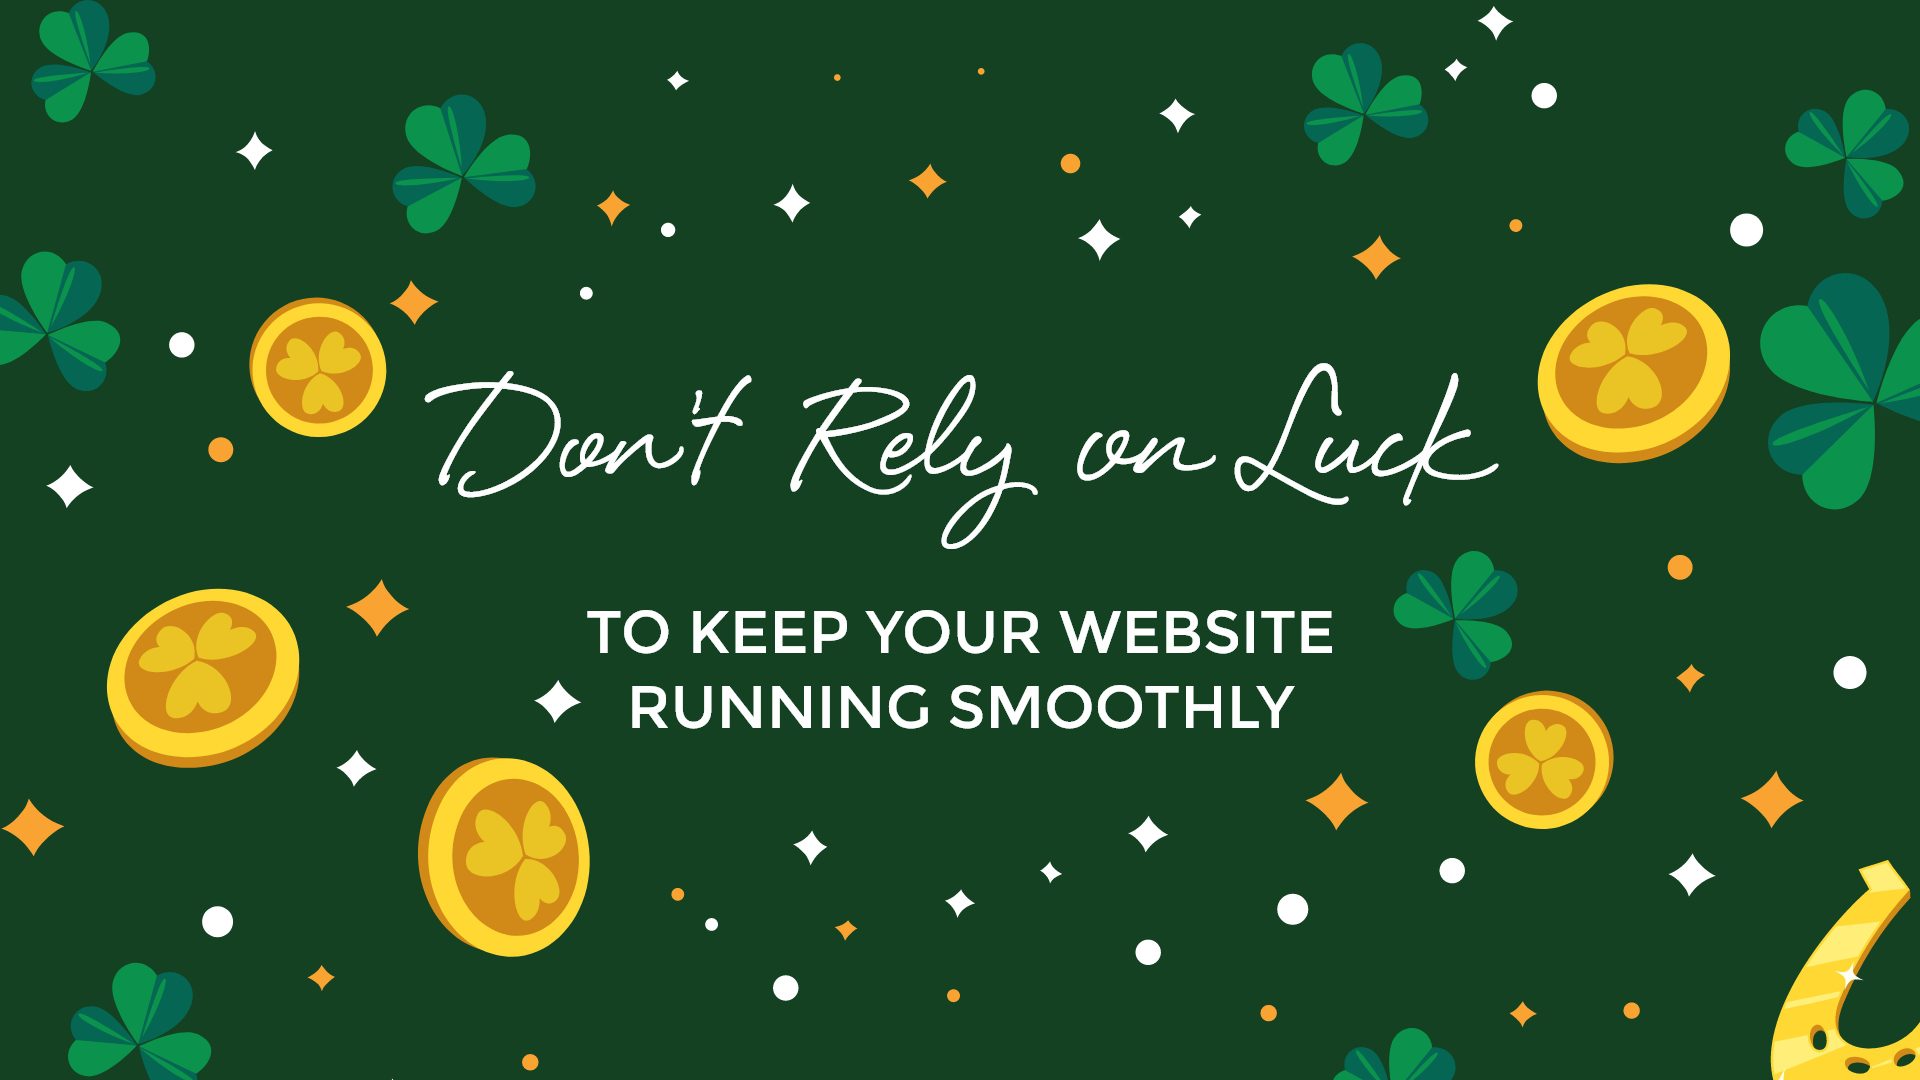 Don't Rely on Luck to Keep Your Website Running Smoothly